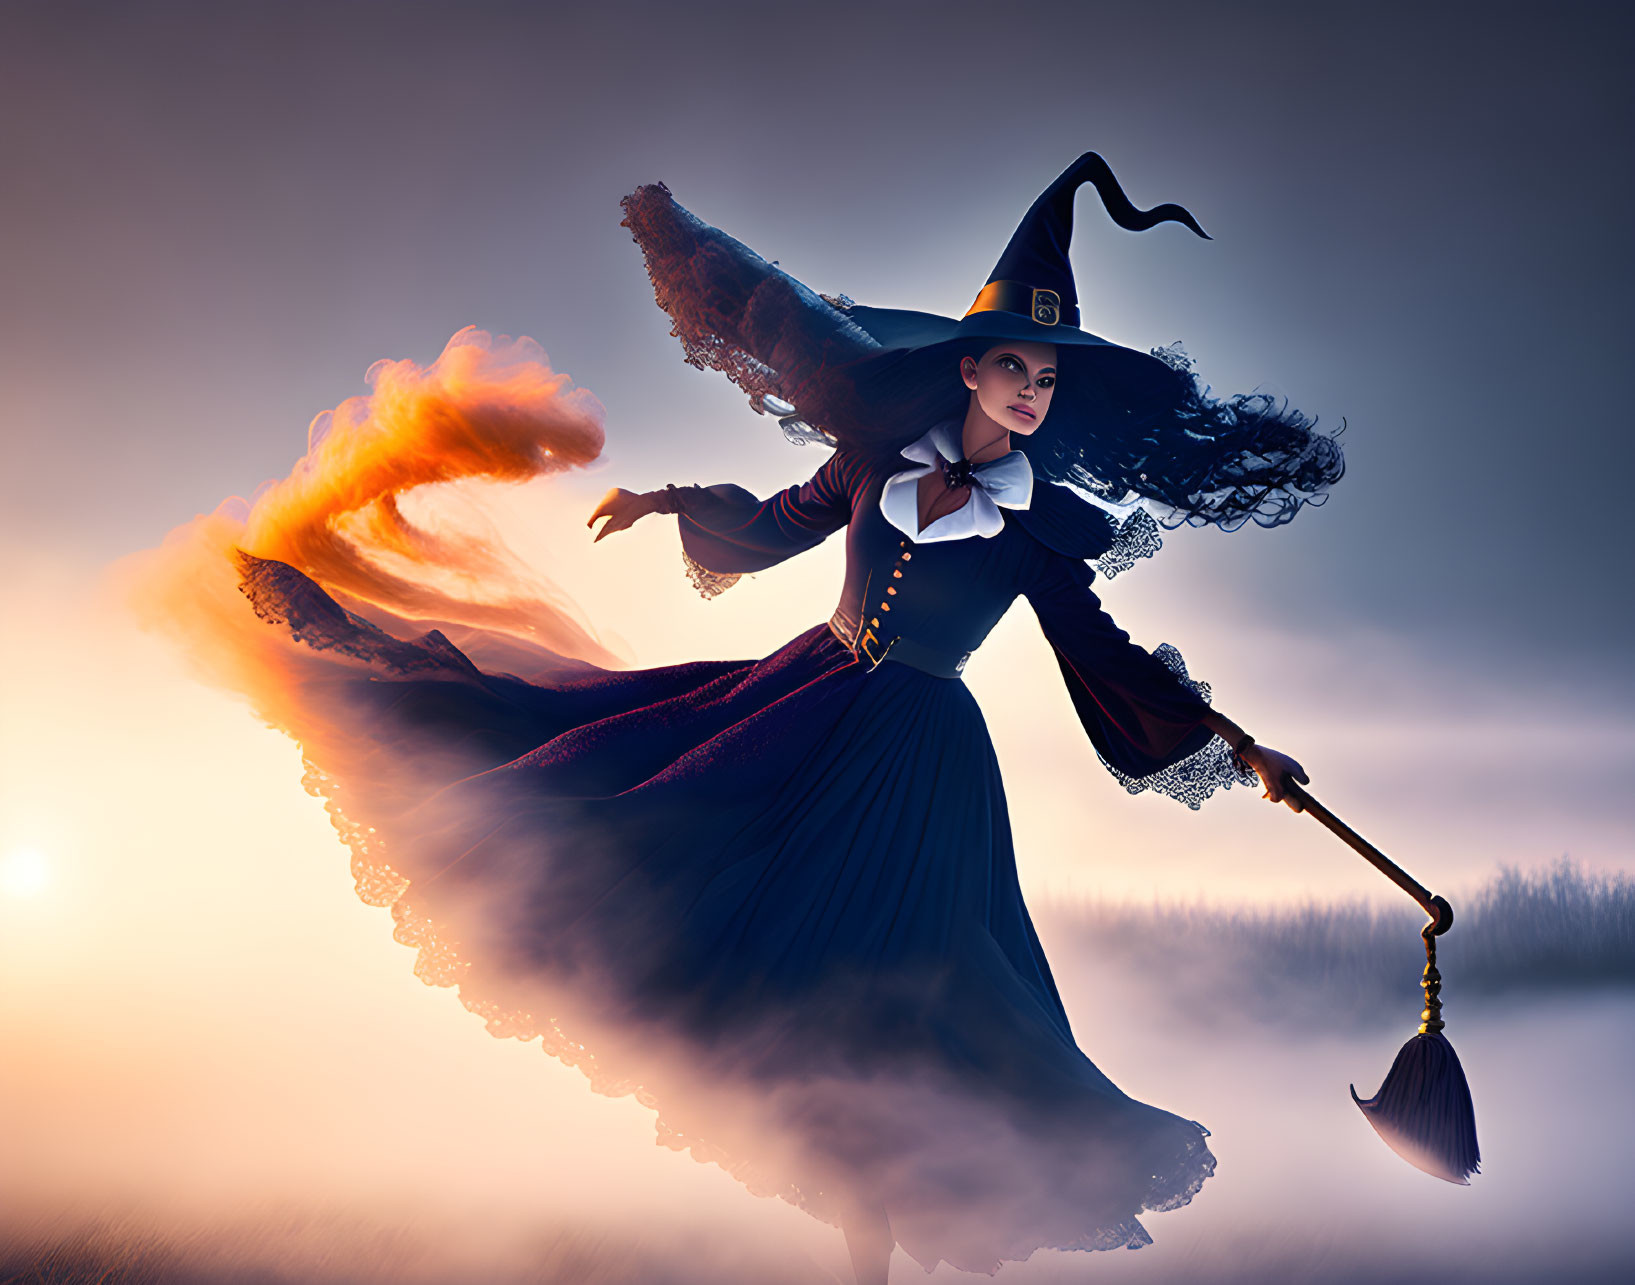 Stylized witch on broomstick in misty twilight scene